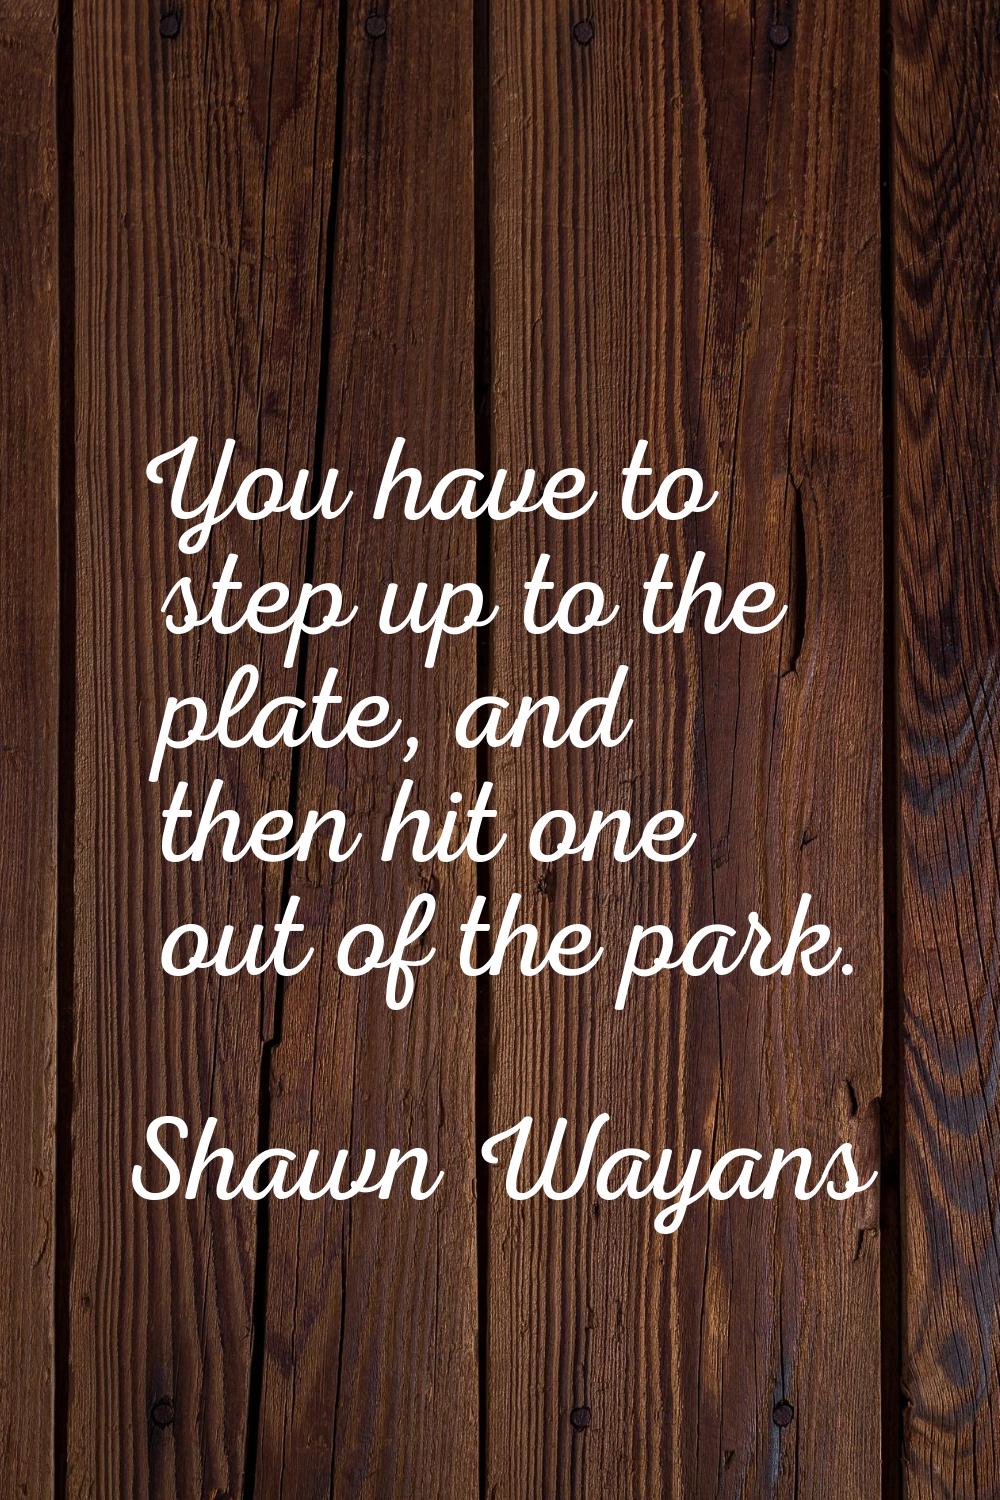 You have to step up to the plate, and then hit one out of the park.